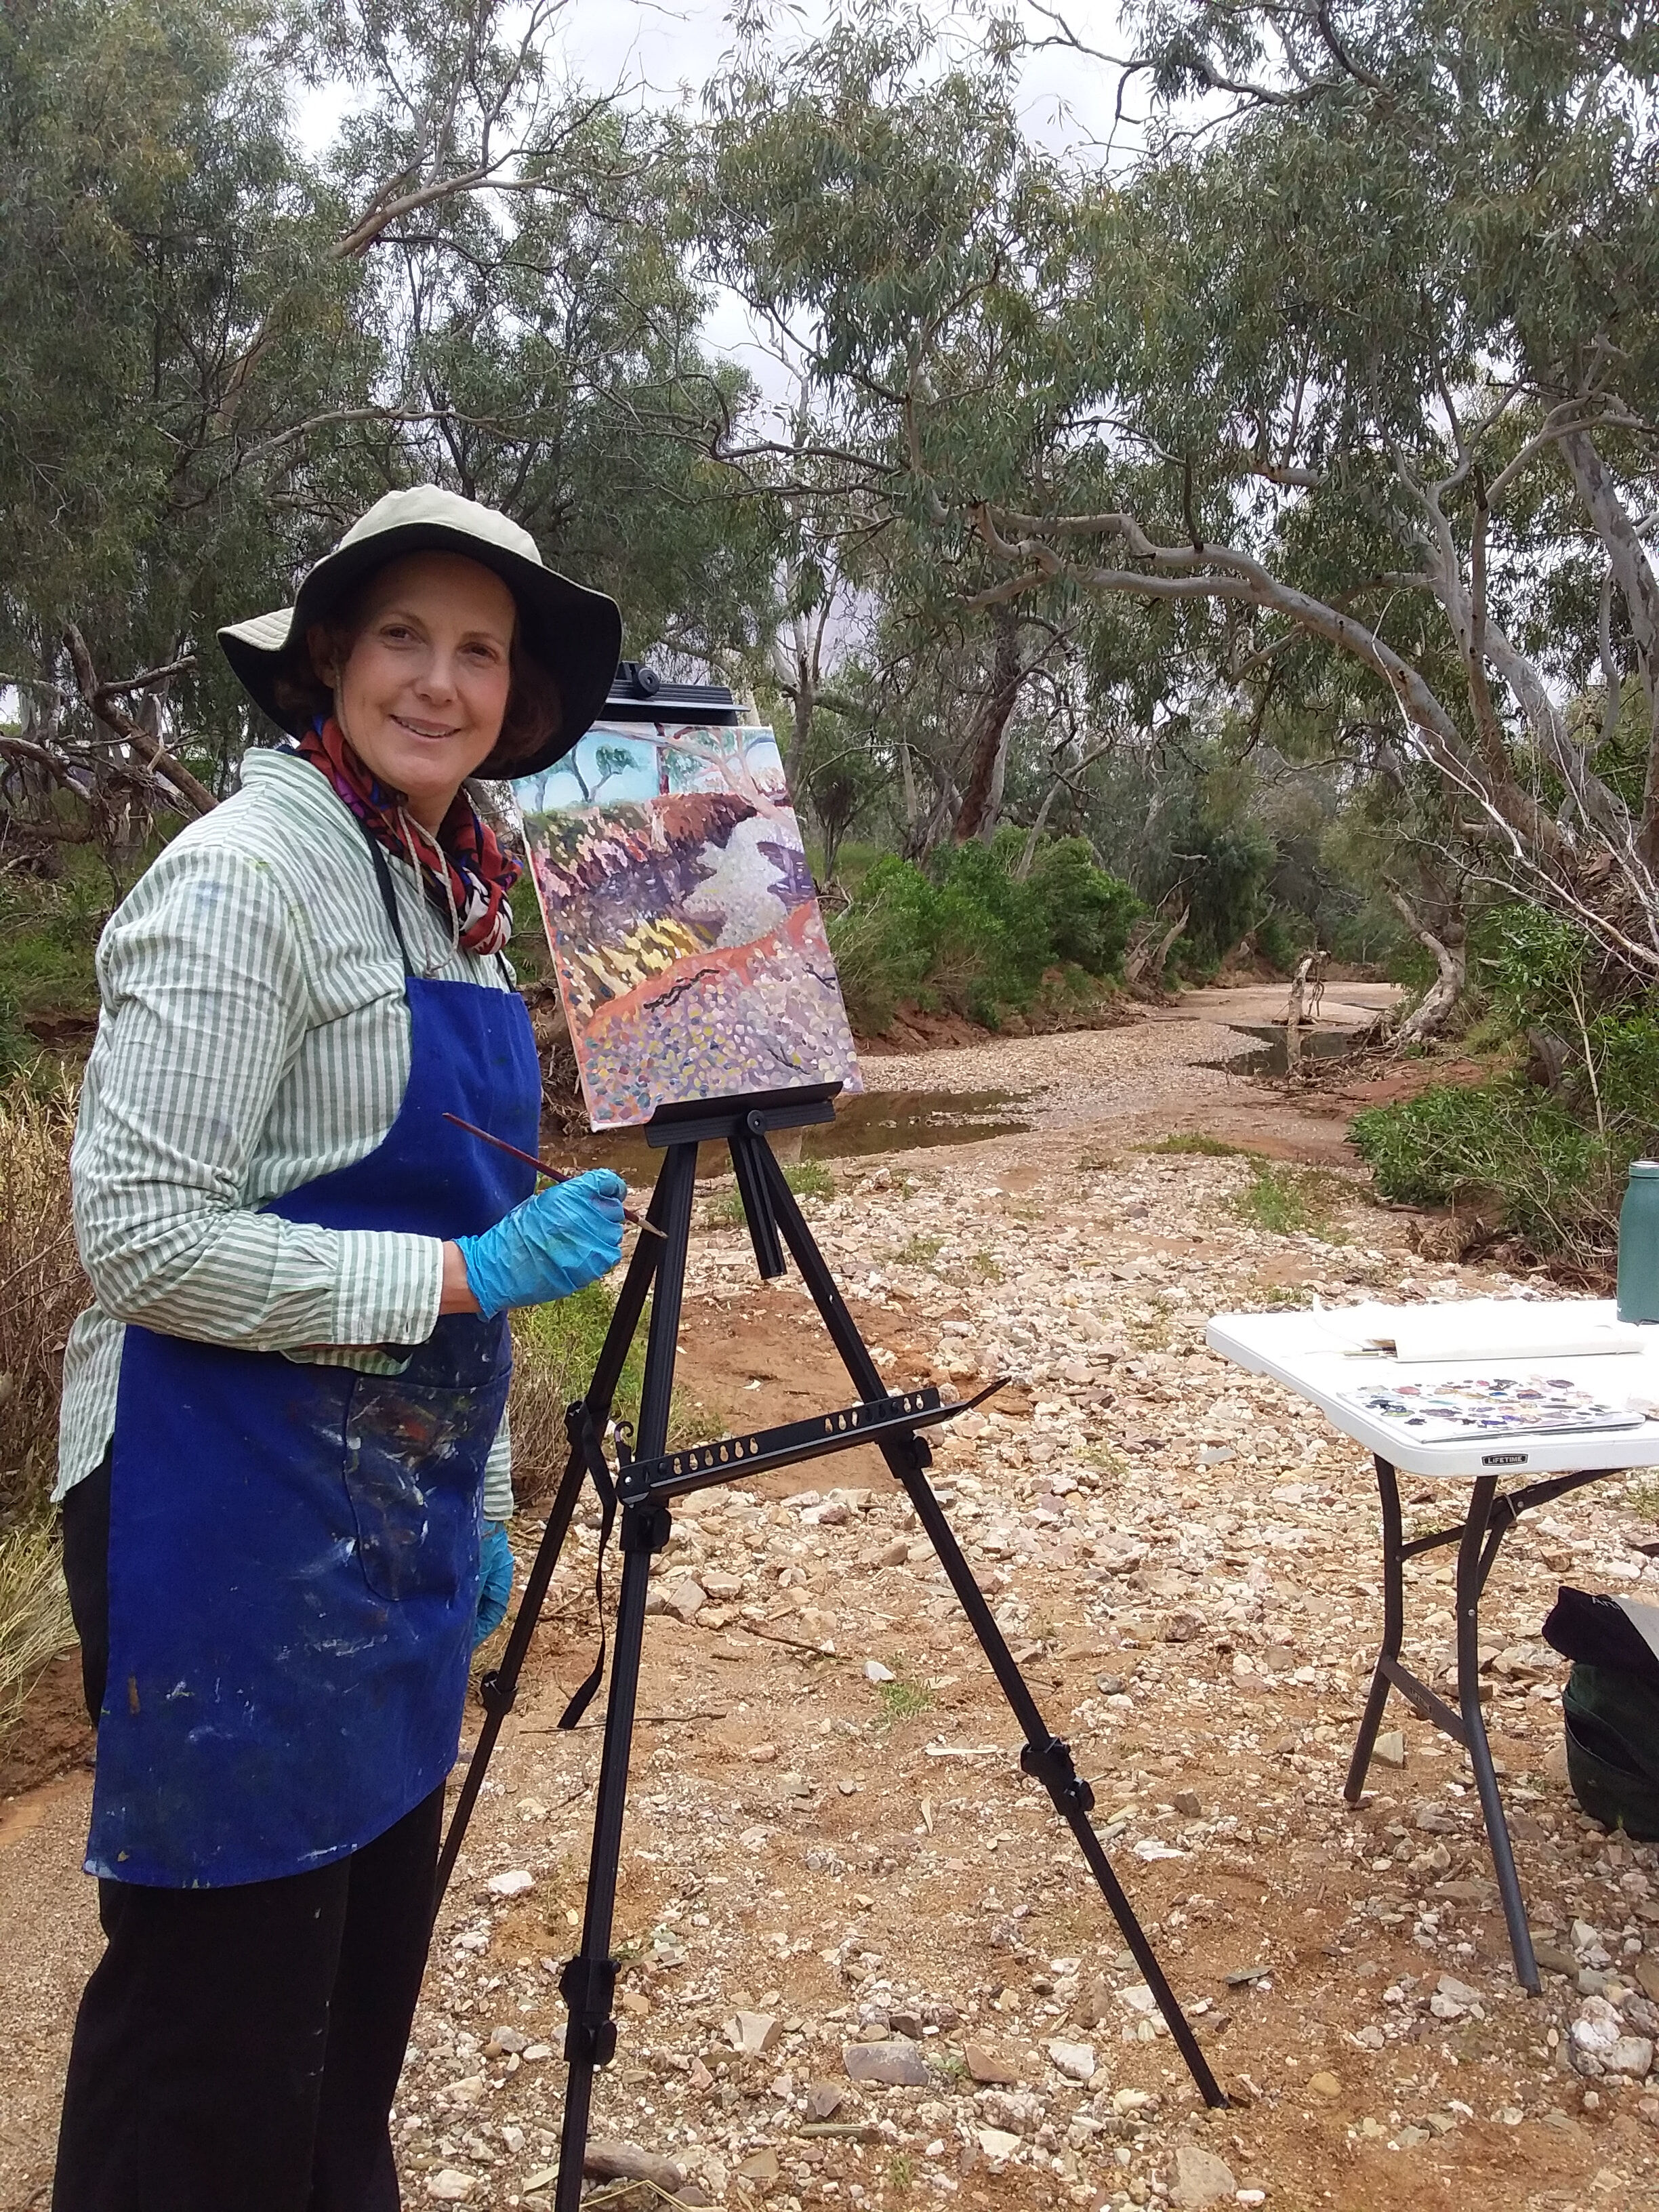 Painting in the Dry Creek Bed, Fowler's Gap